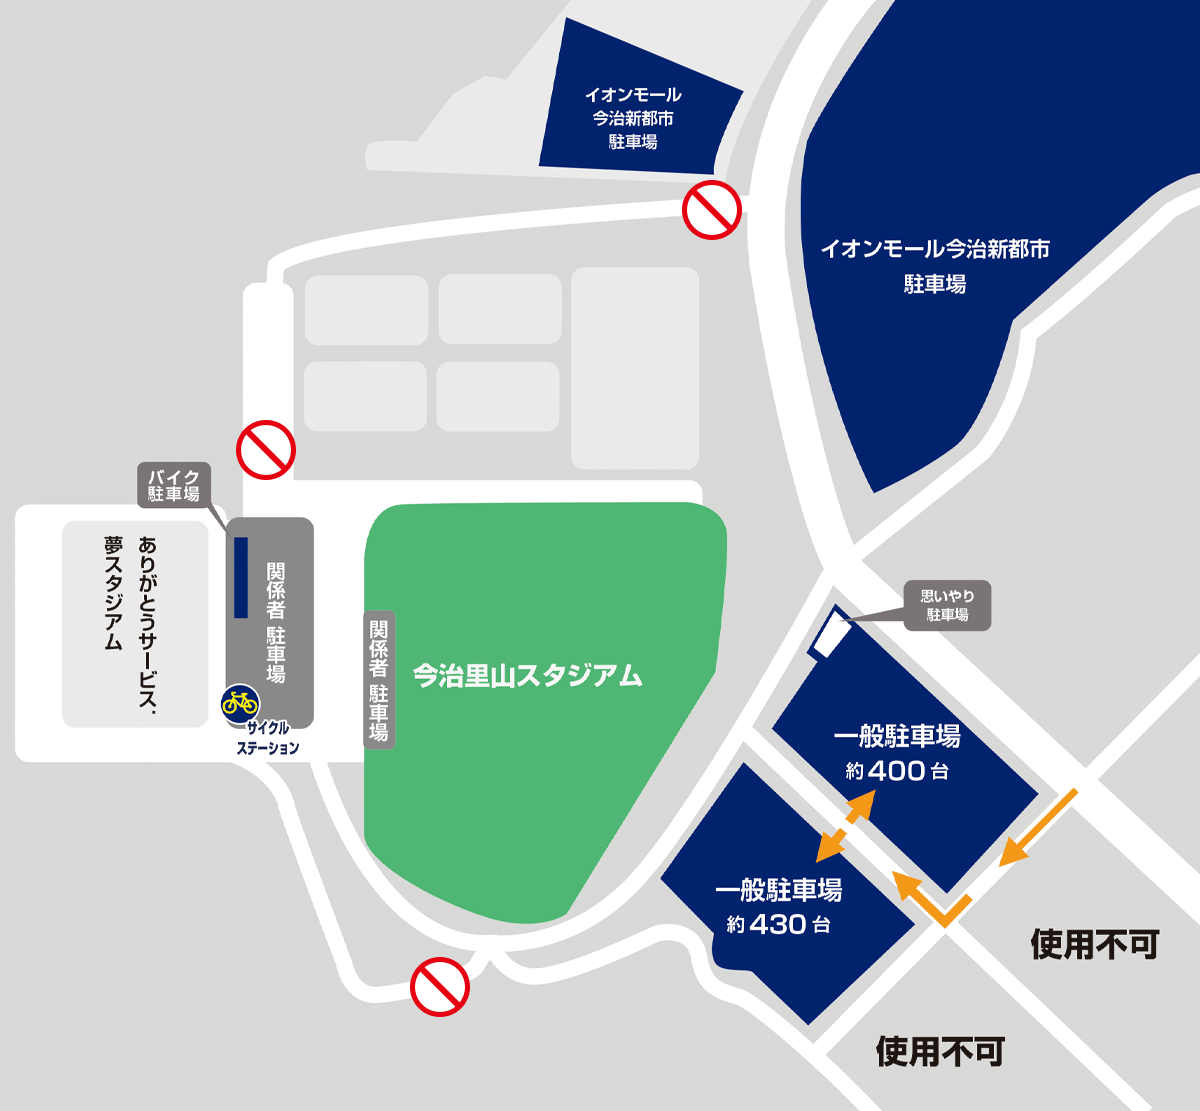 20230129_parking_map.png